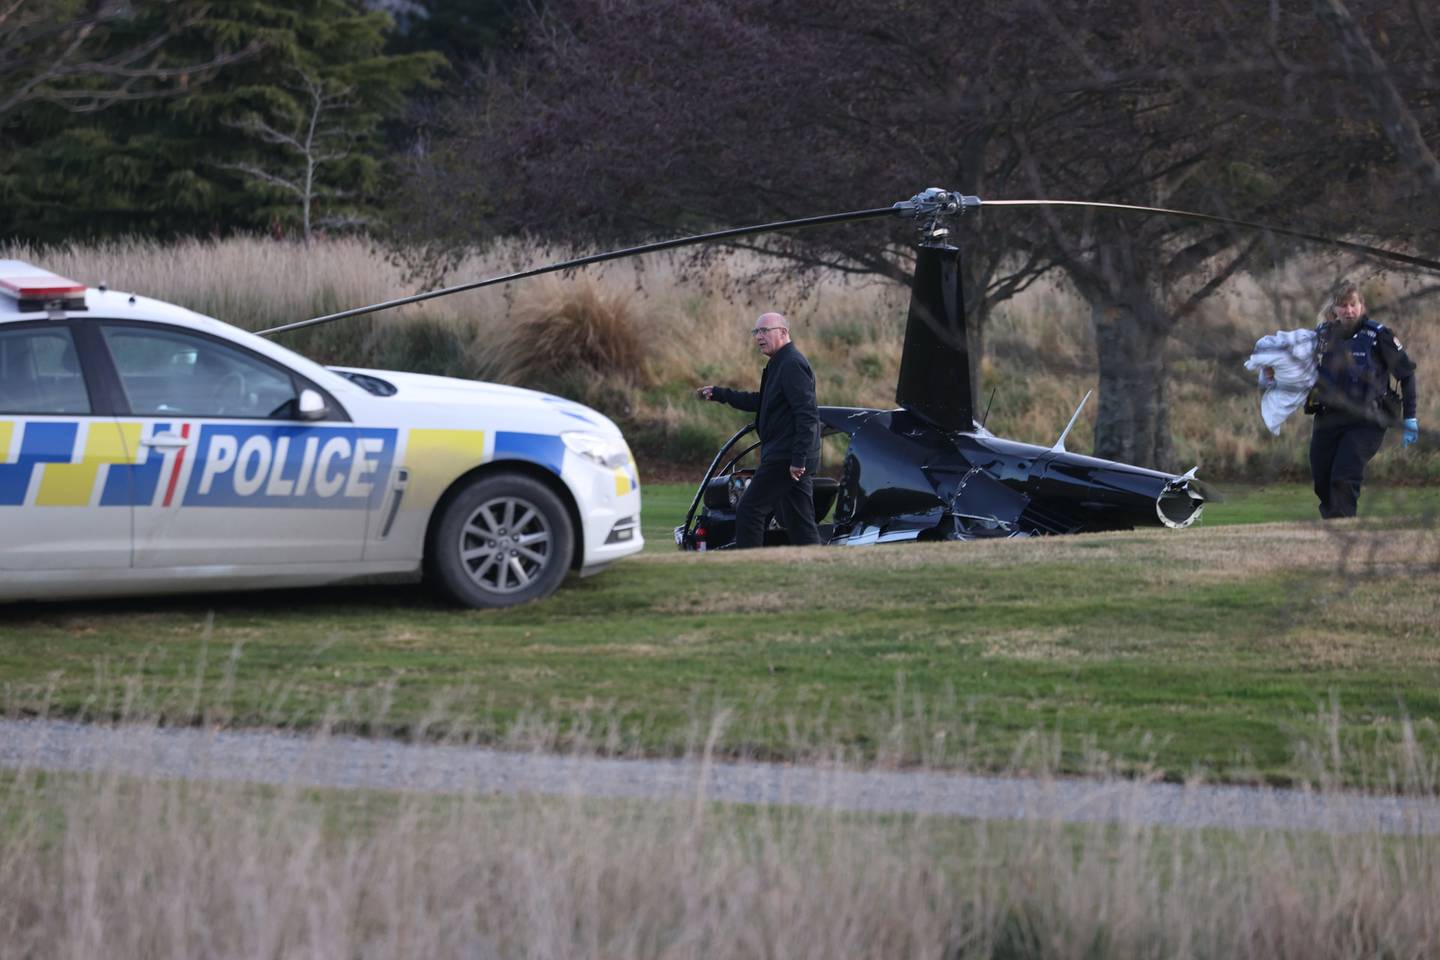 The tail of the Robinson 44 helicopter was sheared off in a crash which injured all four on board, including a couple about to be married. Photo / George Heard